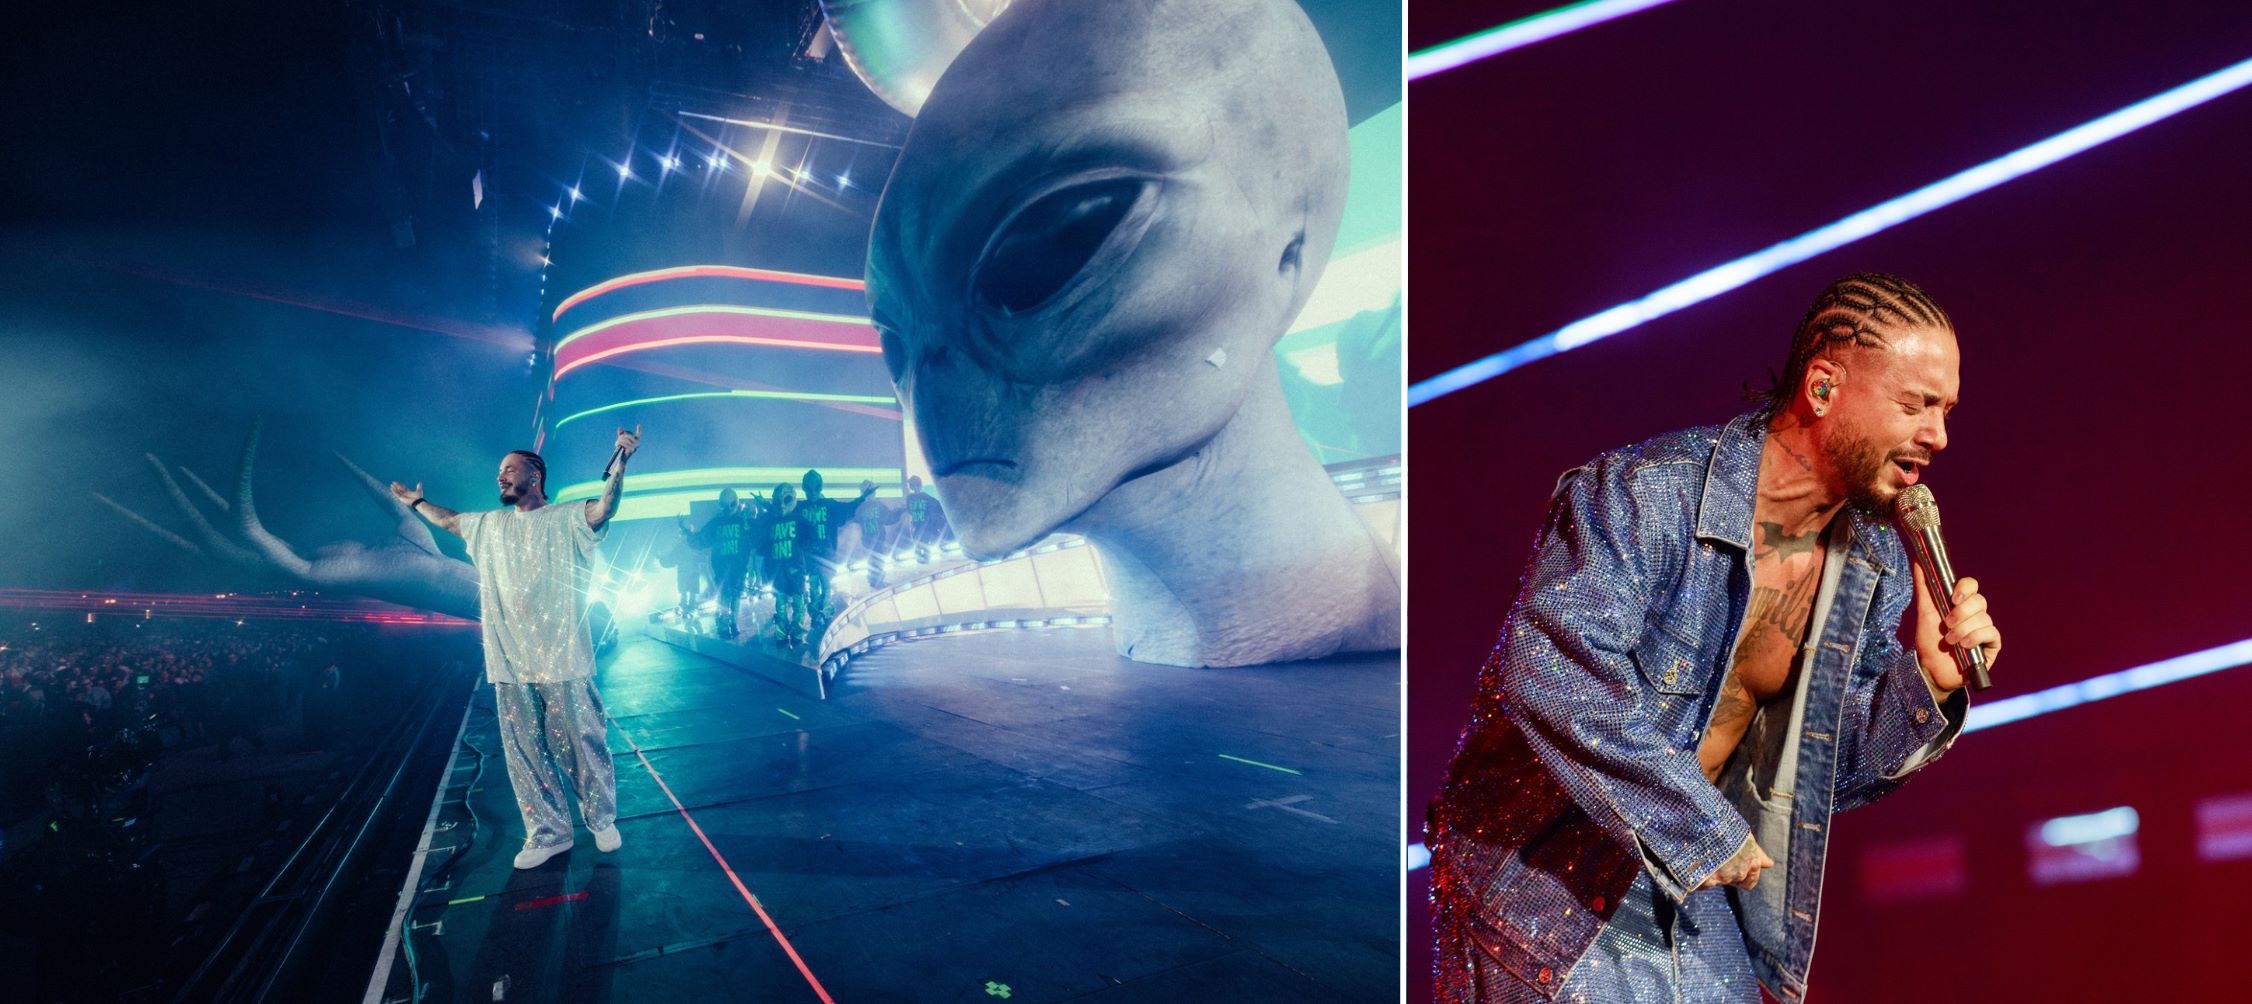 Global Superstar J Balvin Returns to the Coachella Main Stage With an ‘Out of This World’ Performance Under the Desert Stars